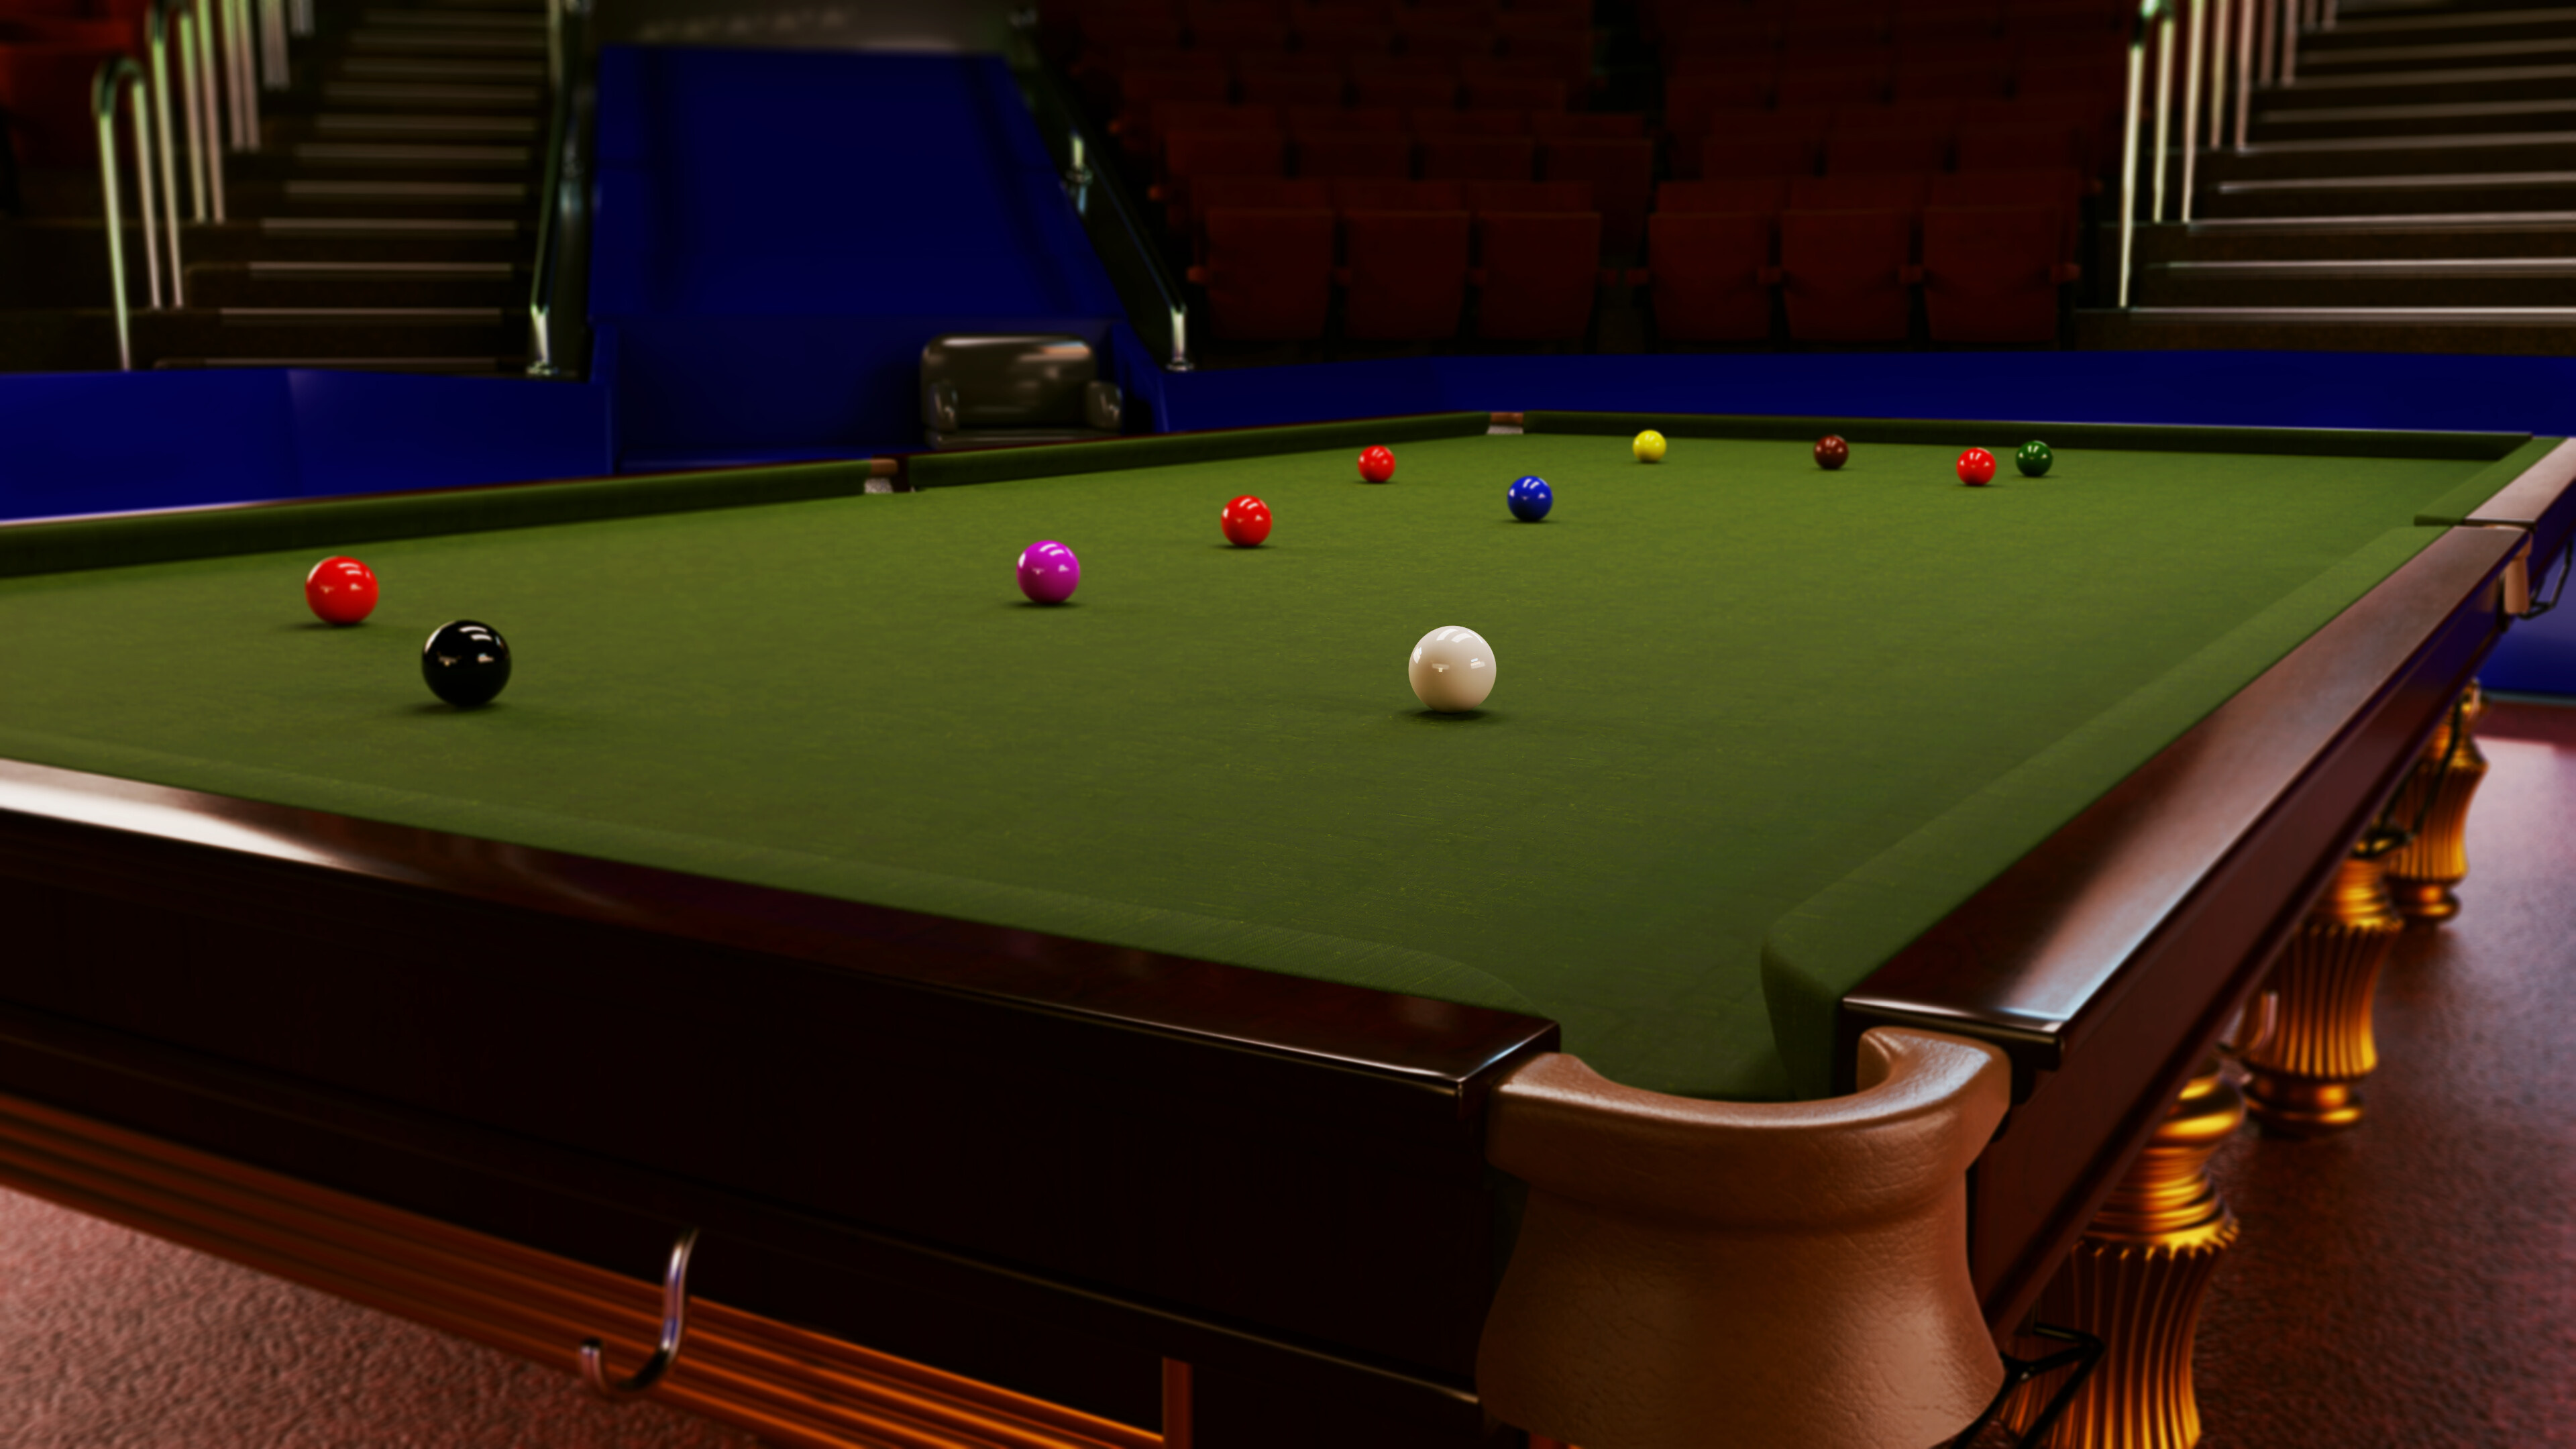 Snooker: A cue sports table that is covered with a green cloth called baize, with six drop pockets. 3840x2160 4K Wallpaper.